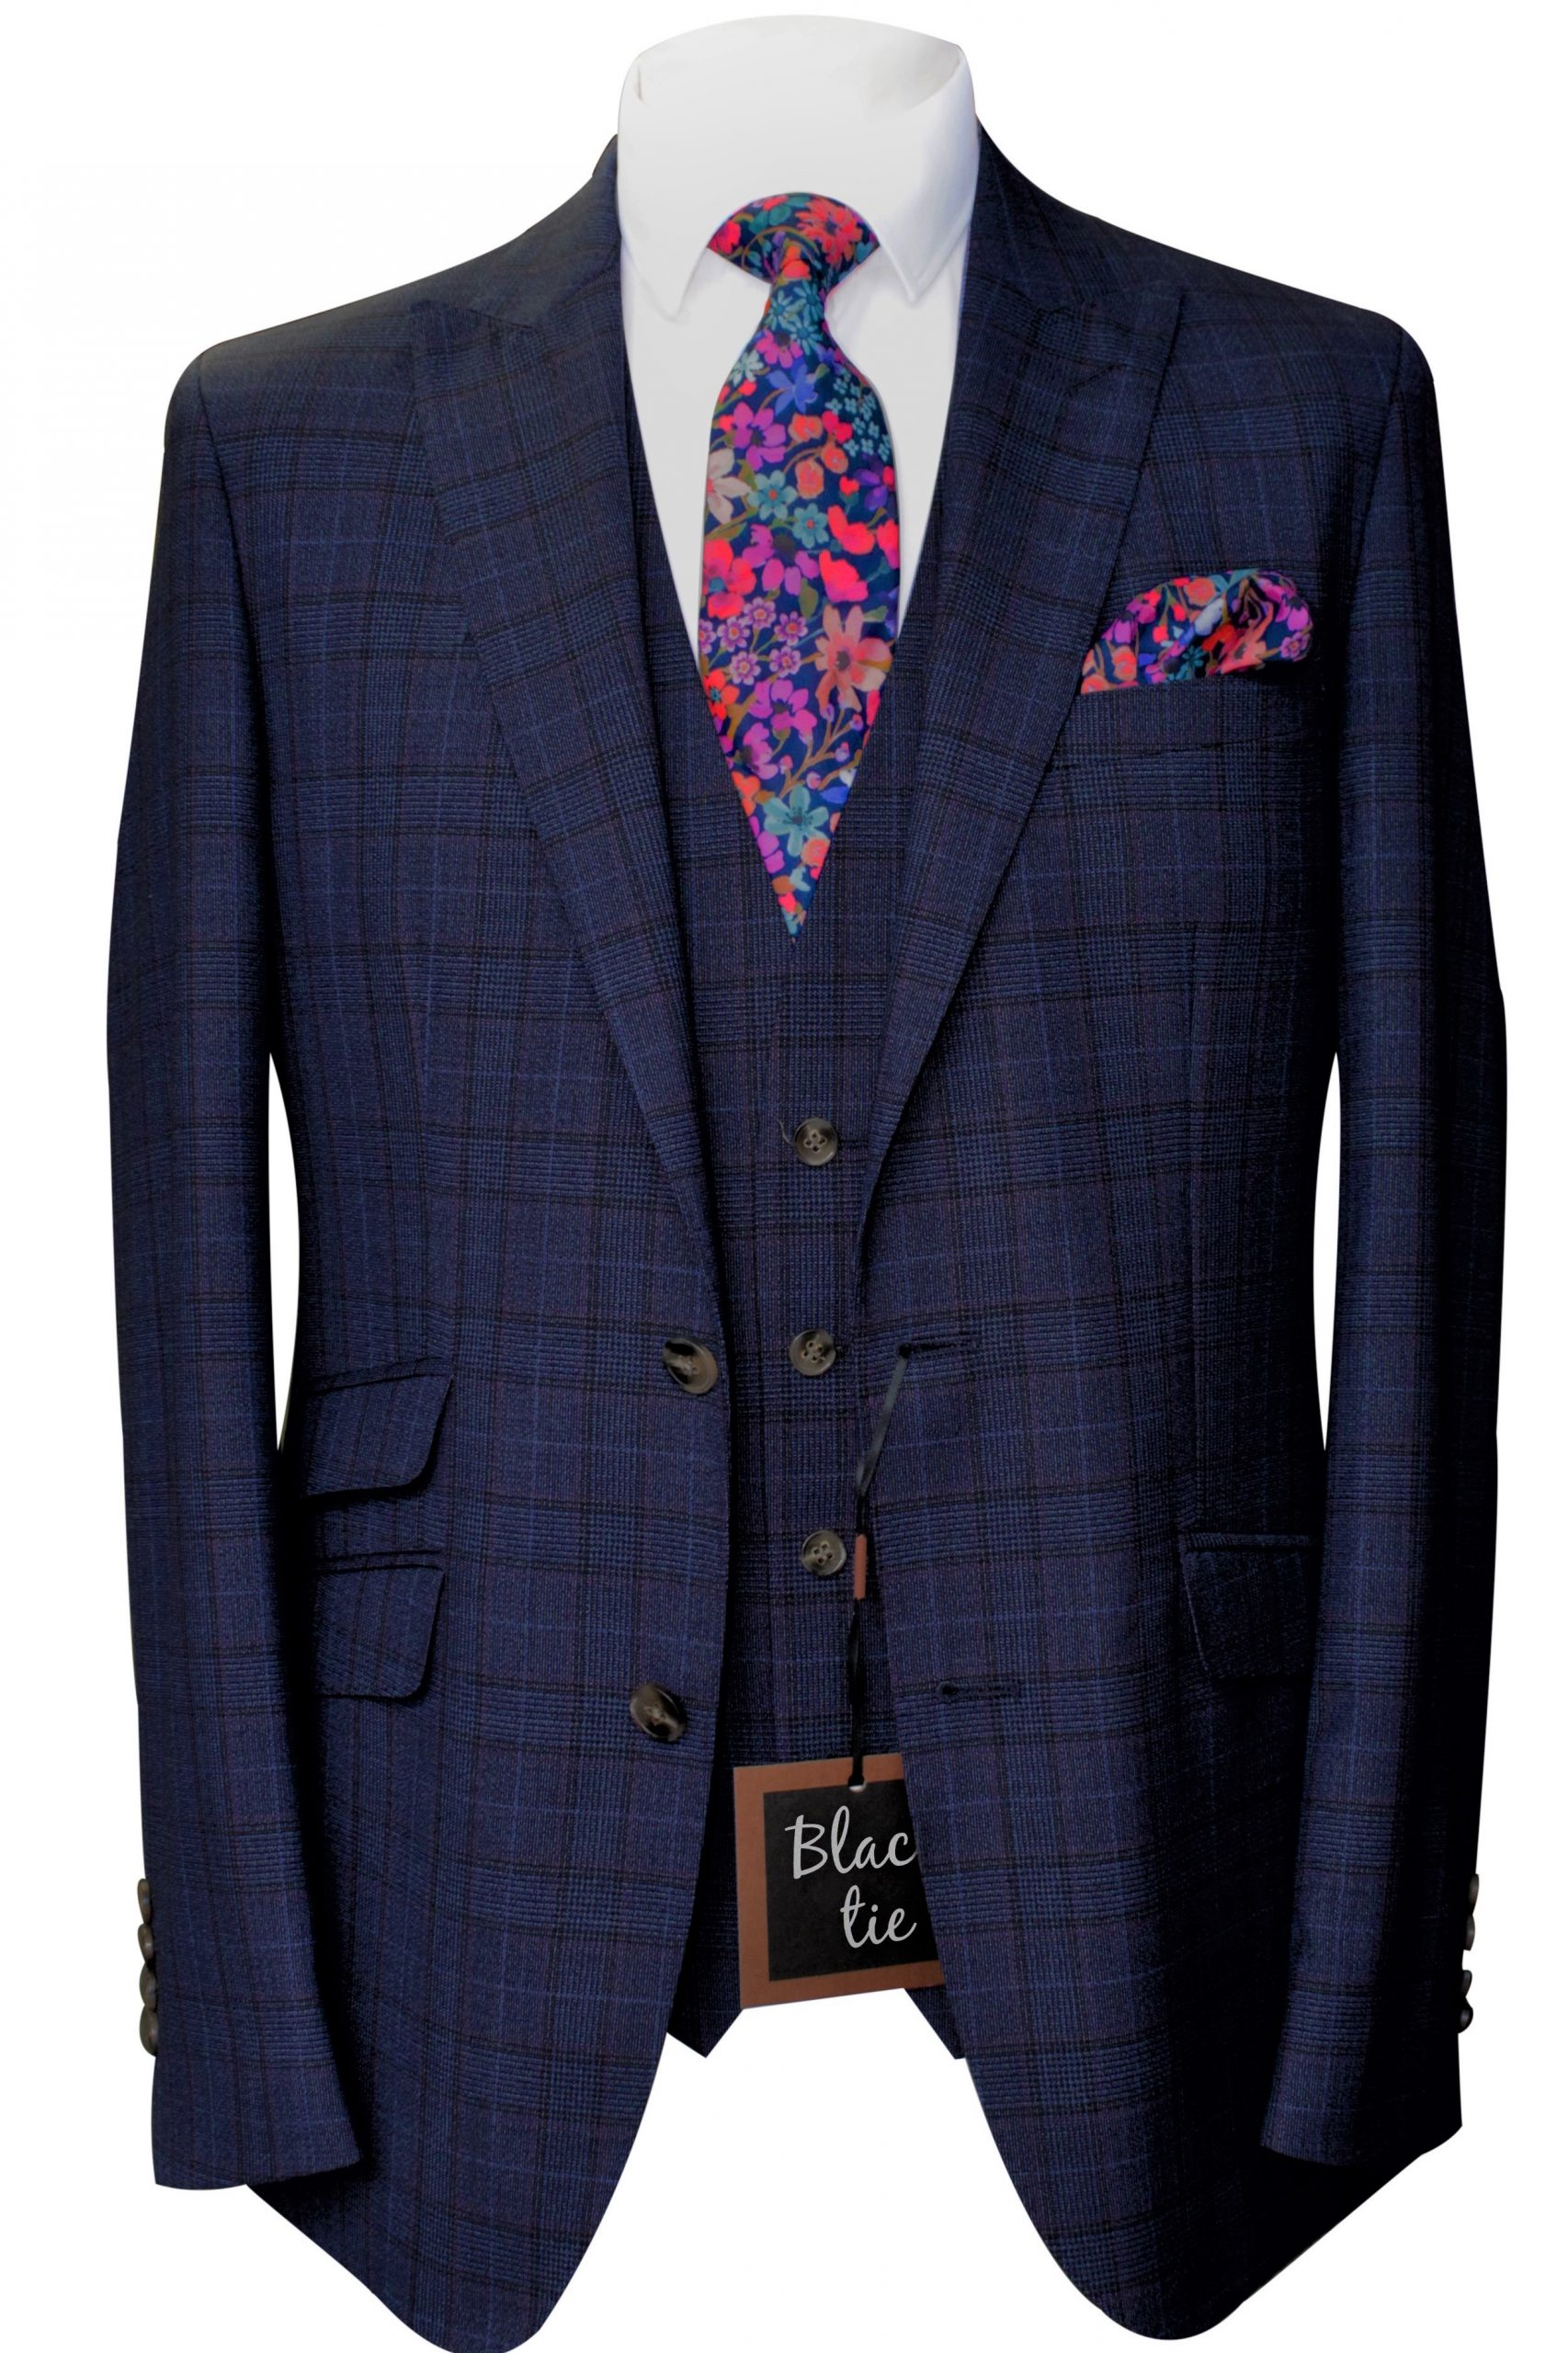 Navy Check Wool Mens Wedding Lounge Suit with floral liberty tie and handkerchief